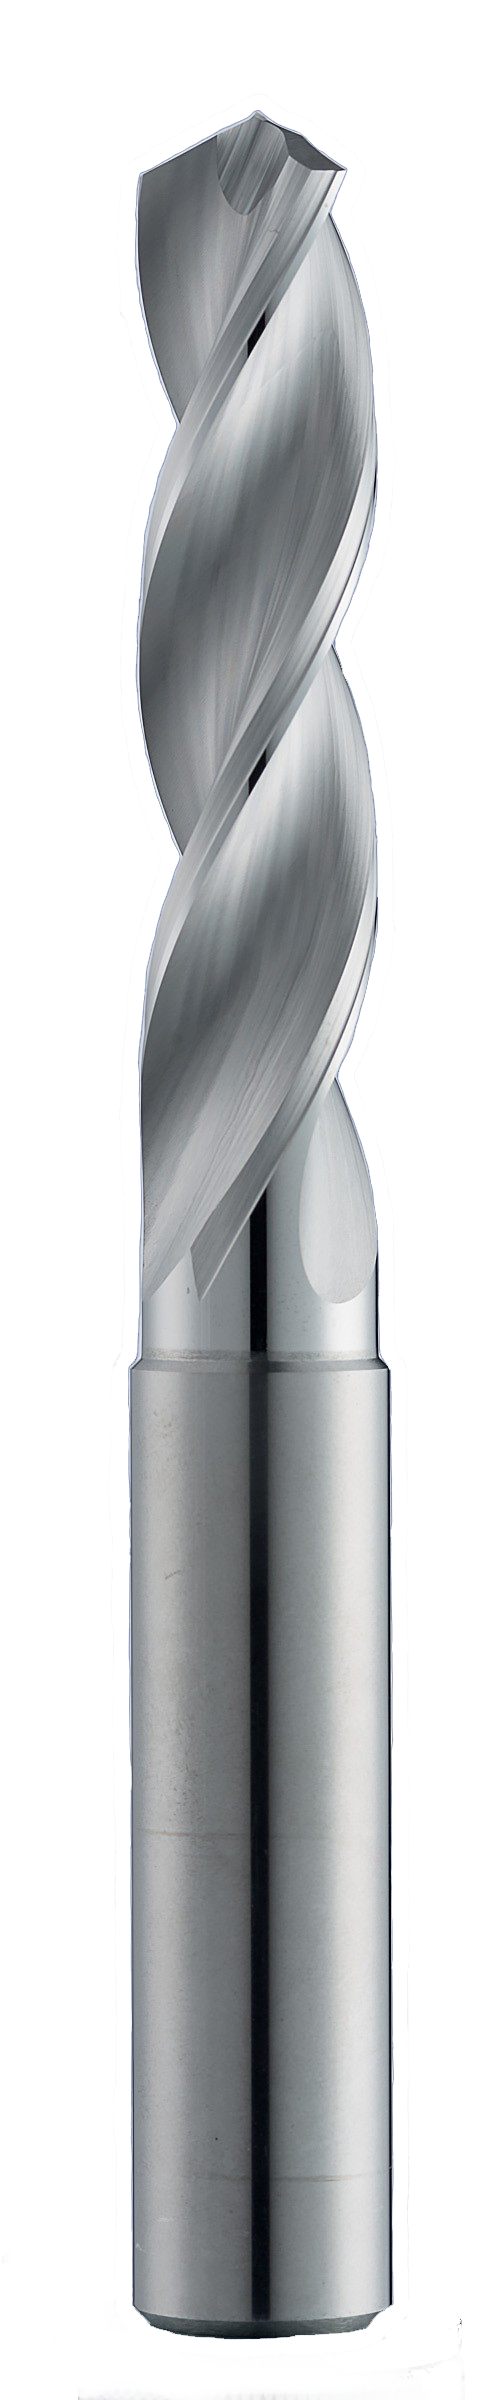 7/16" Dia, 124 Degree Point, Solid Carbide Drill - 54625